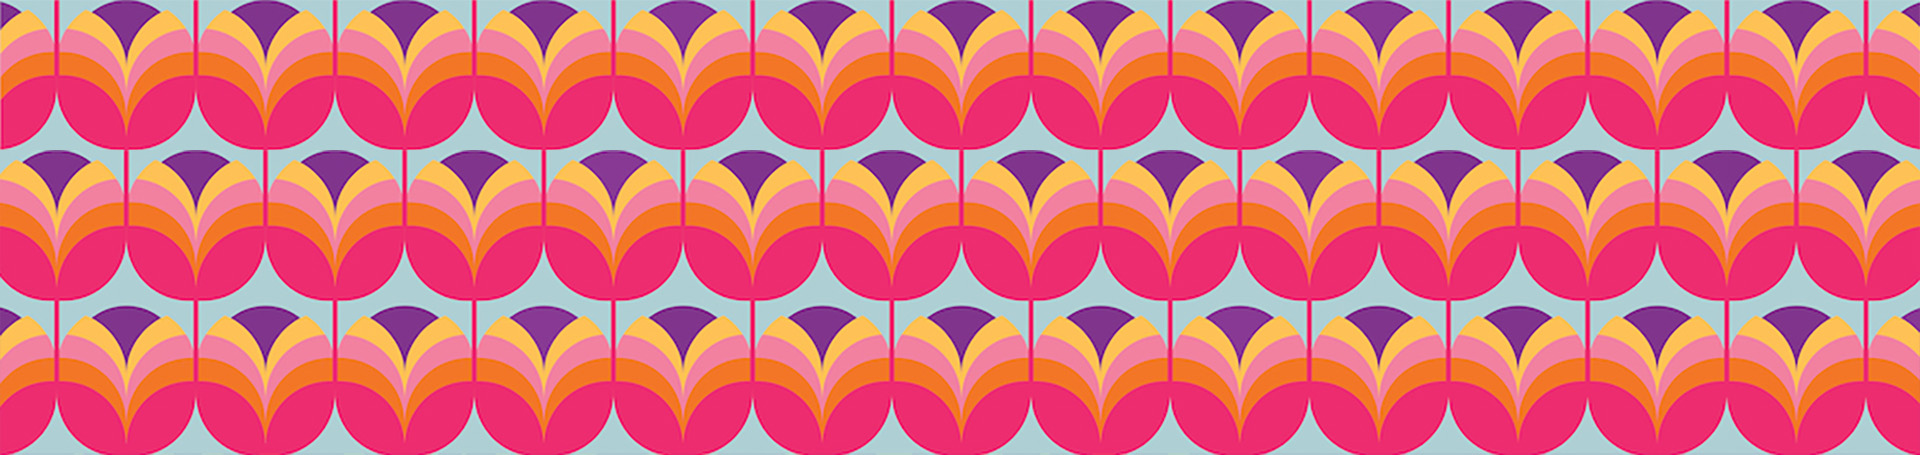 Repeating Graphic Tulip Pattern